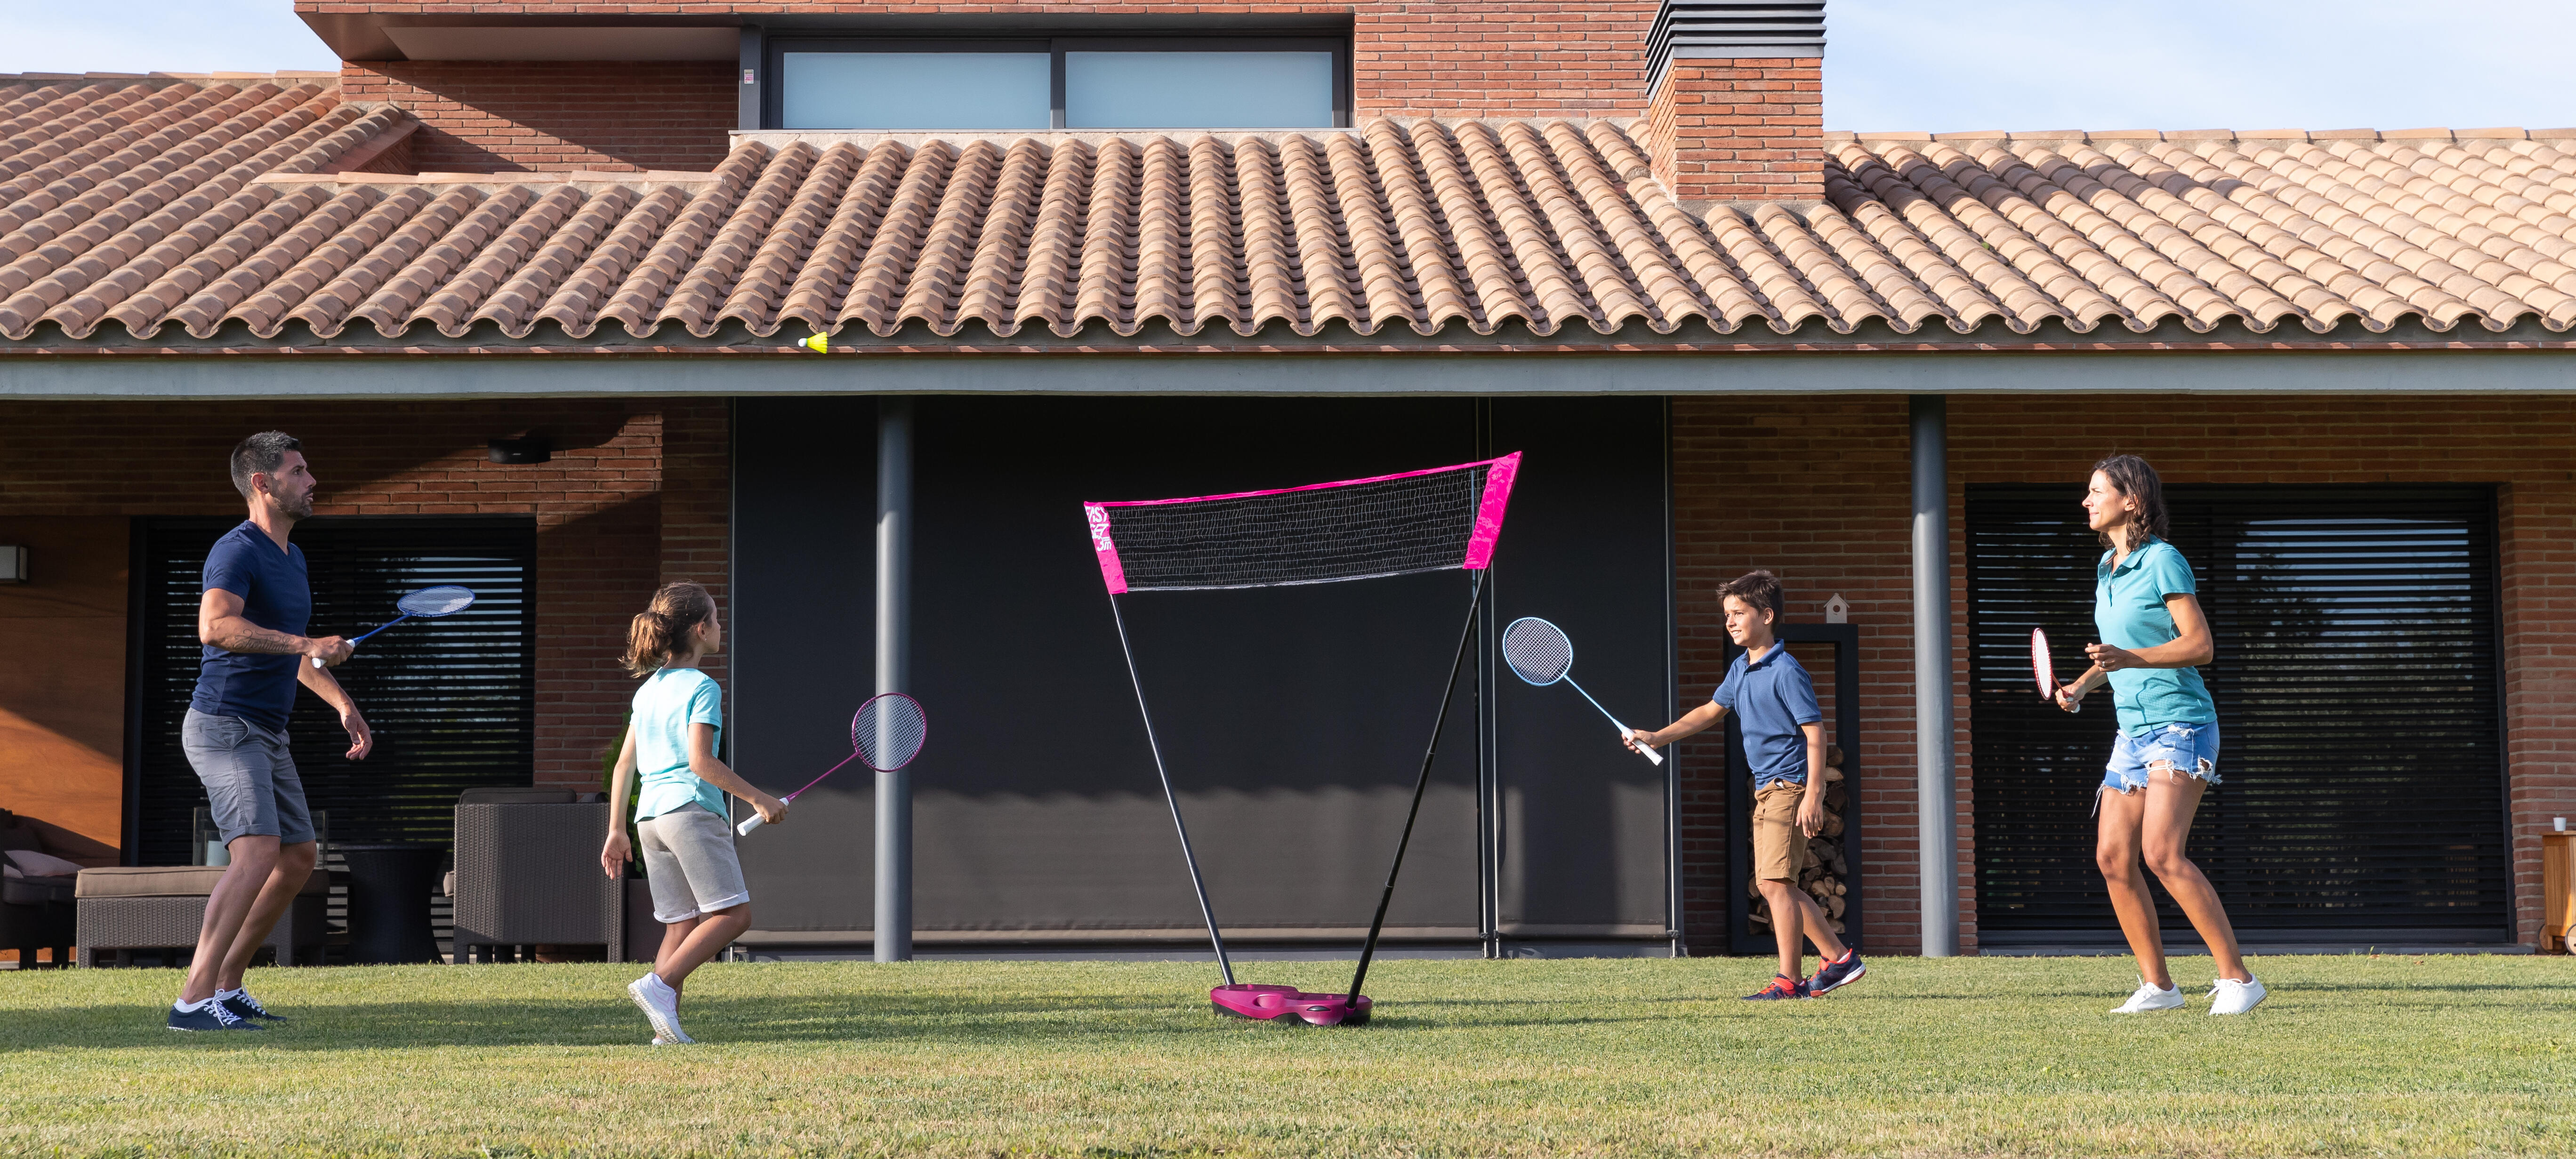 Racket Sports  Easy to install equipment for Home & Outdoor Workouts